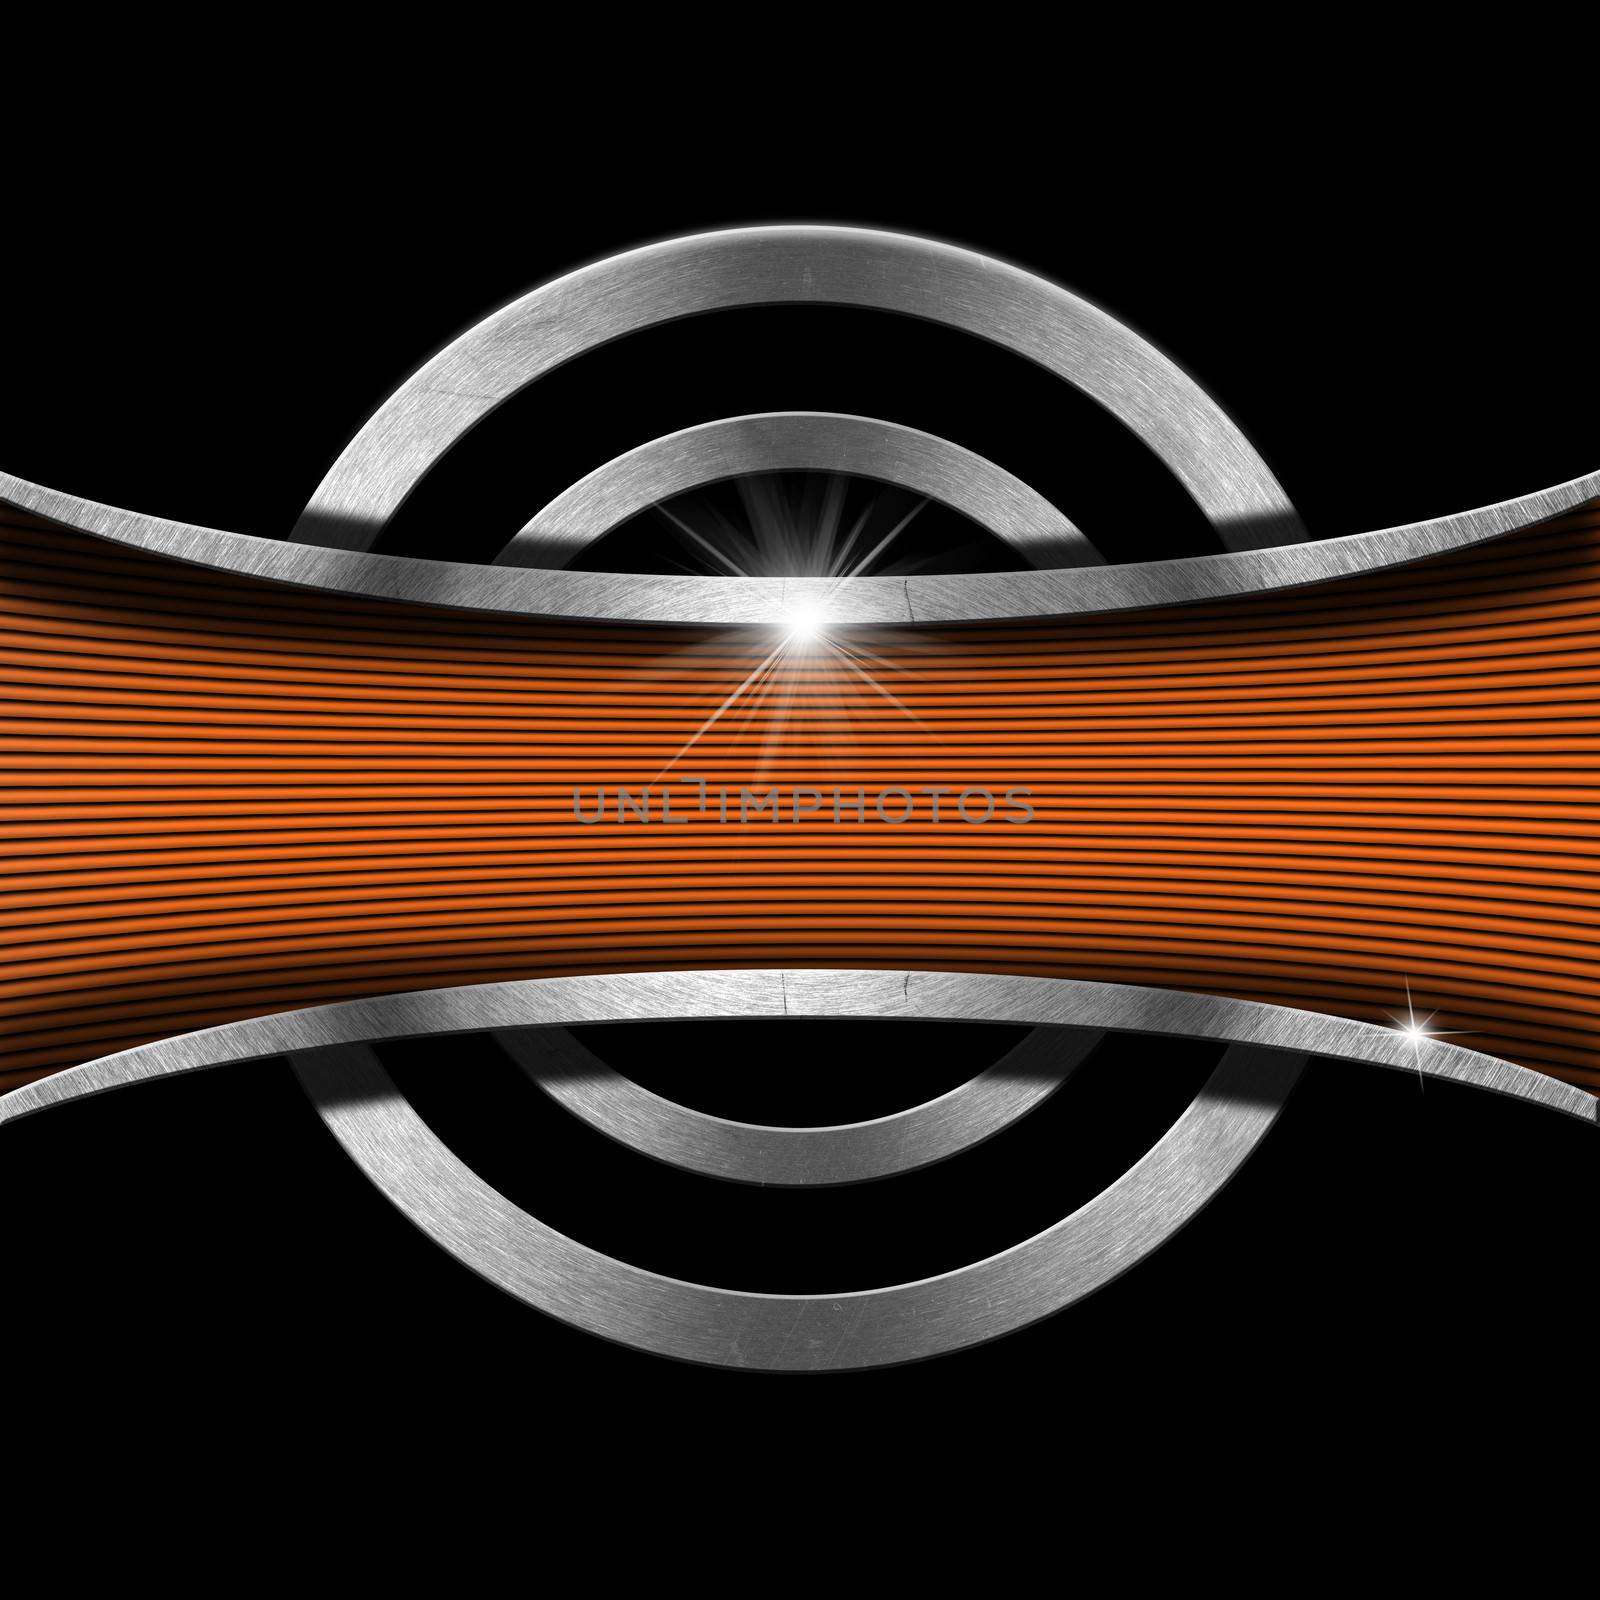 Metallic and black abstract background with orange metal frame
